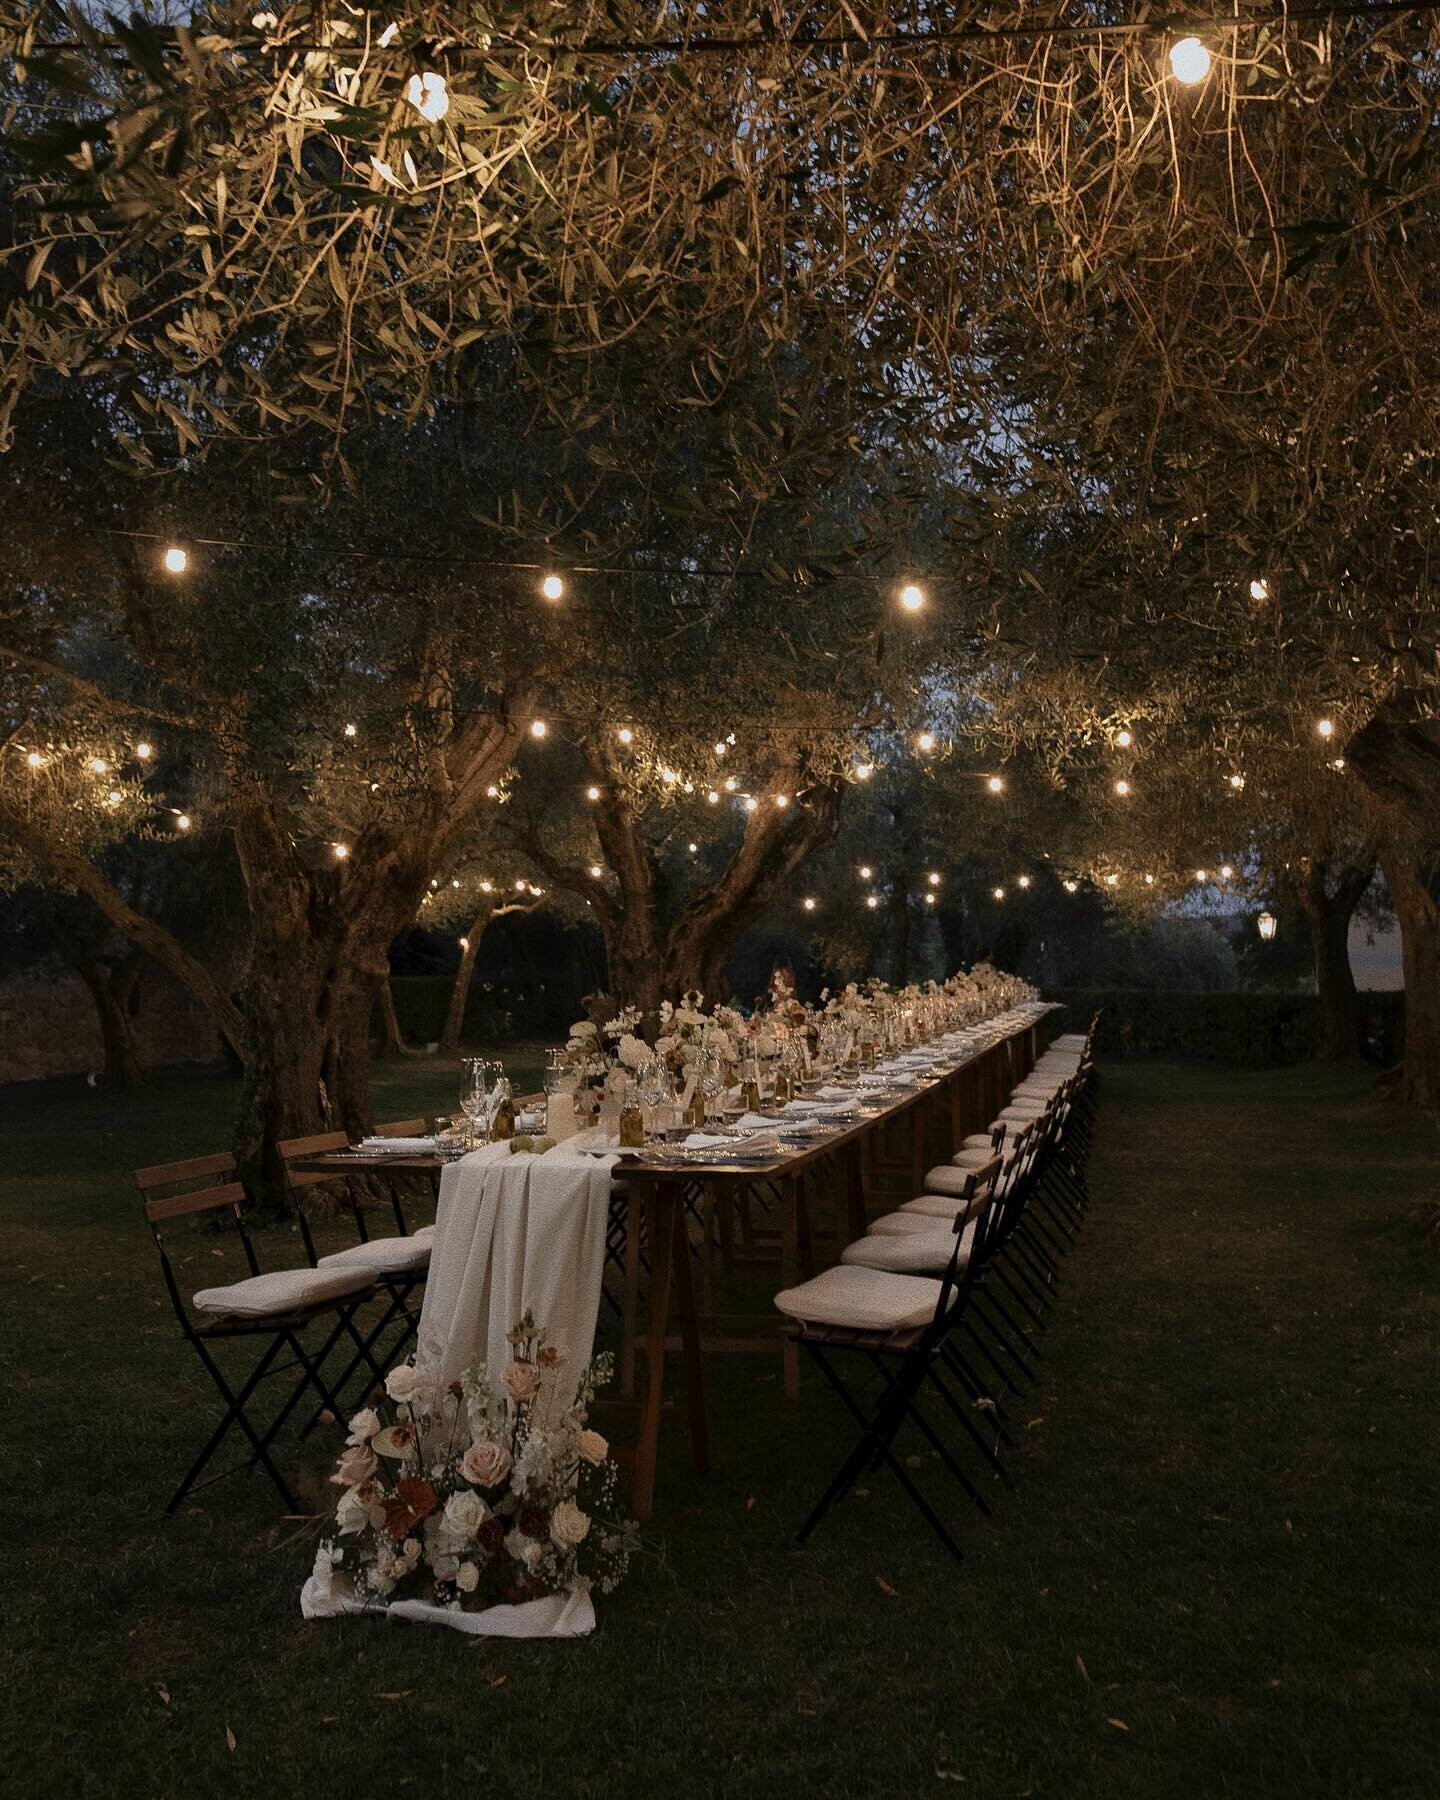 This is the moment when dreams become reality. ✨
Most beautiful table setting &amp; floral arrangements surrounded by olive trees!
I always knew that I wanted an al fresco dinner for our wedding. All the guests sit together at a long table, share Ita